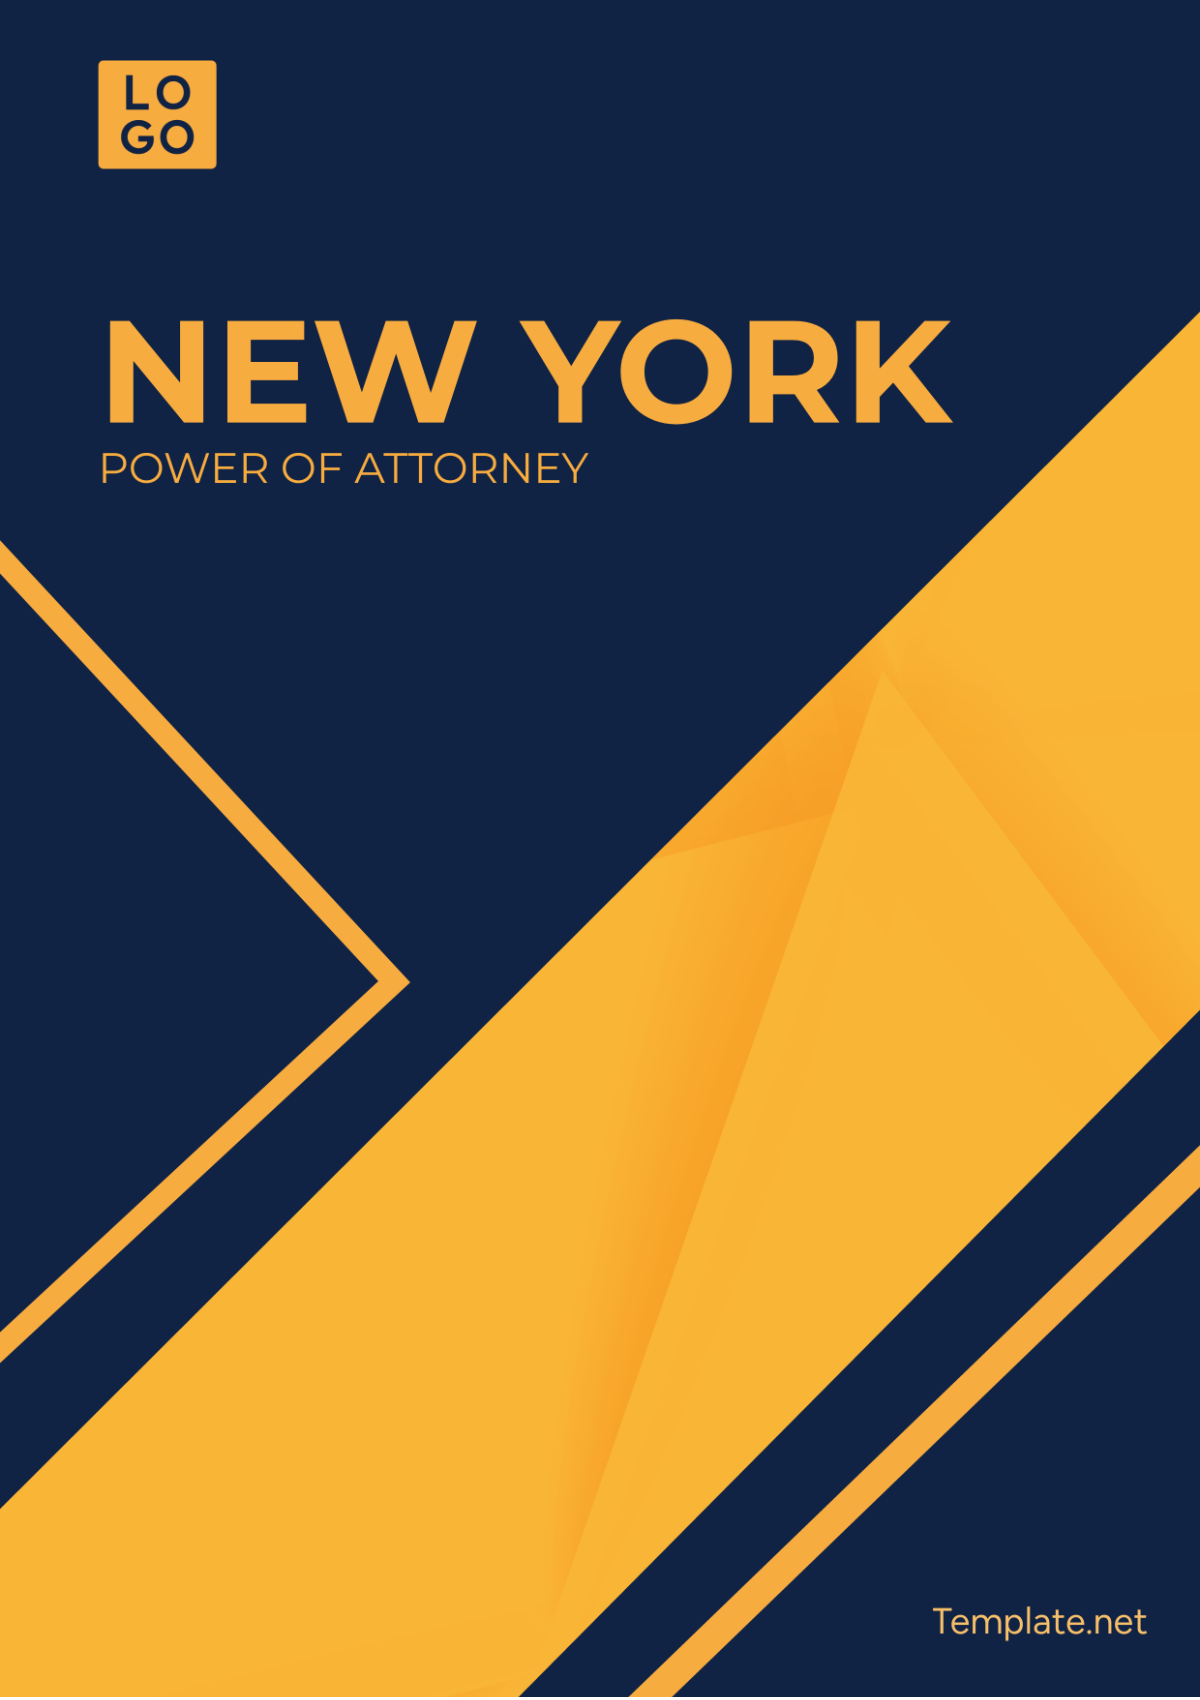 New York Power of Attorney Template